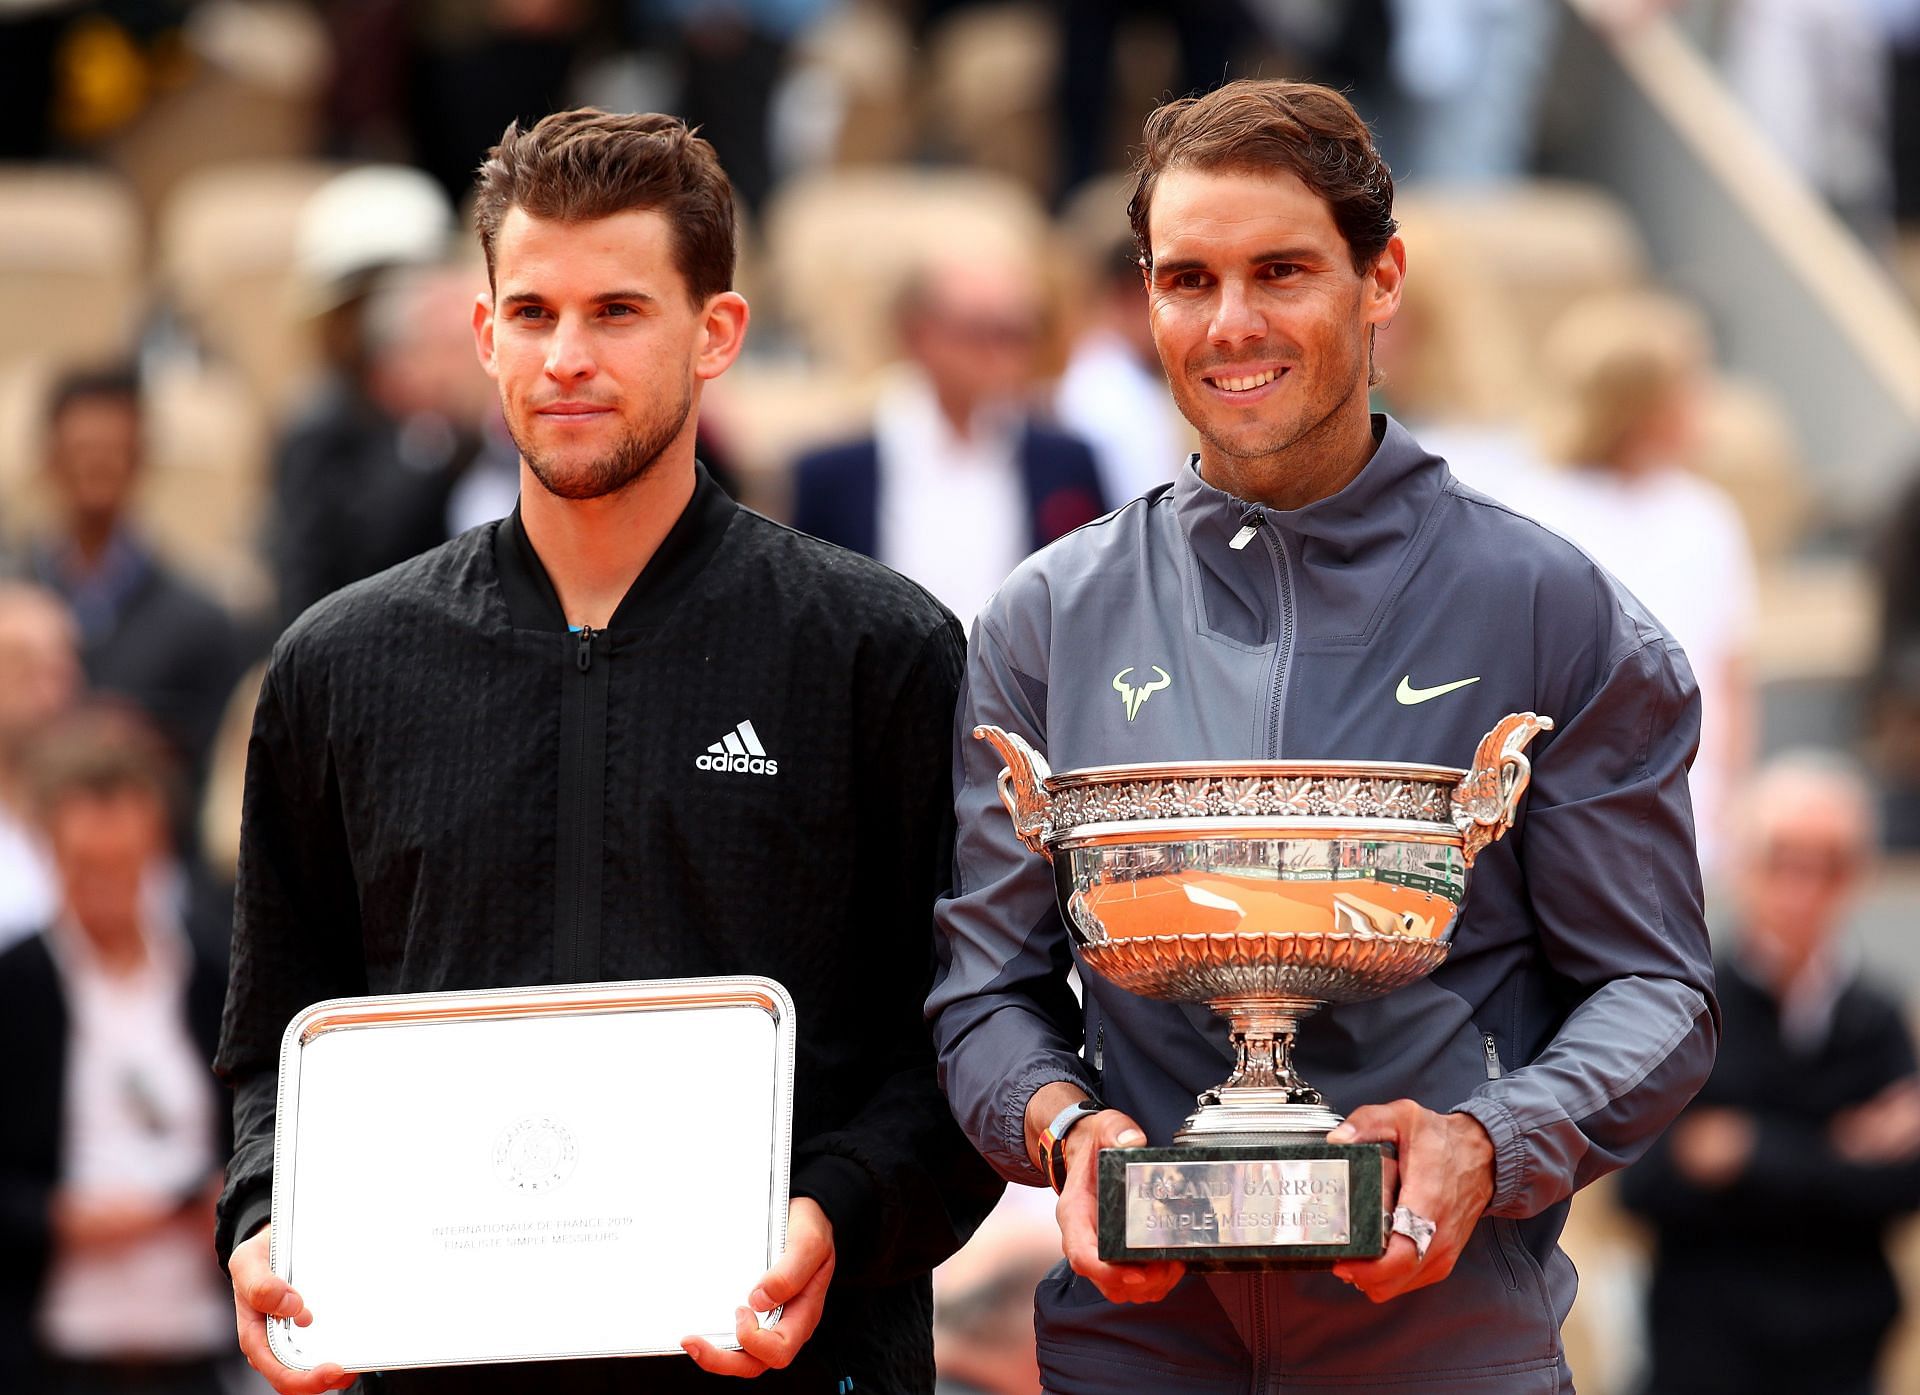 Dominic Thiem and Rafael Nadal after the 2019 French Open final